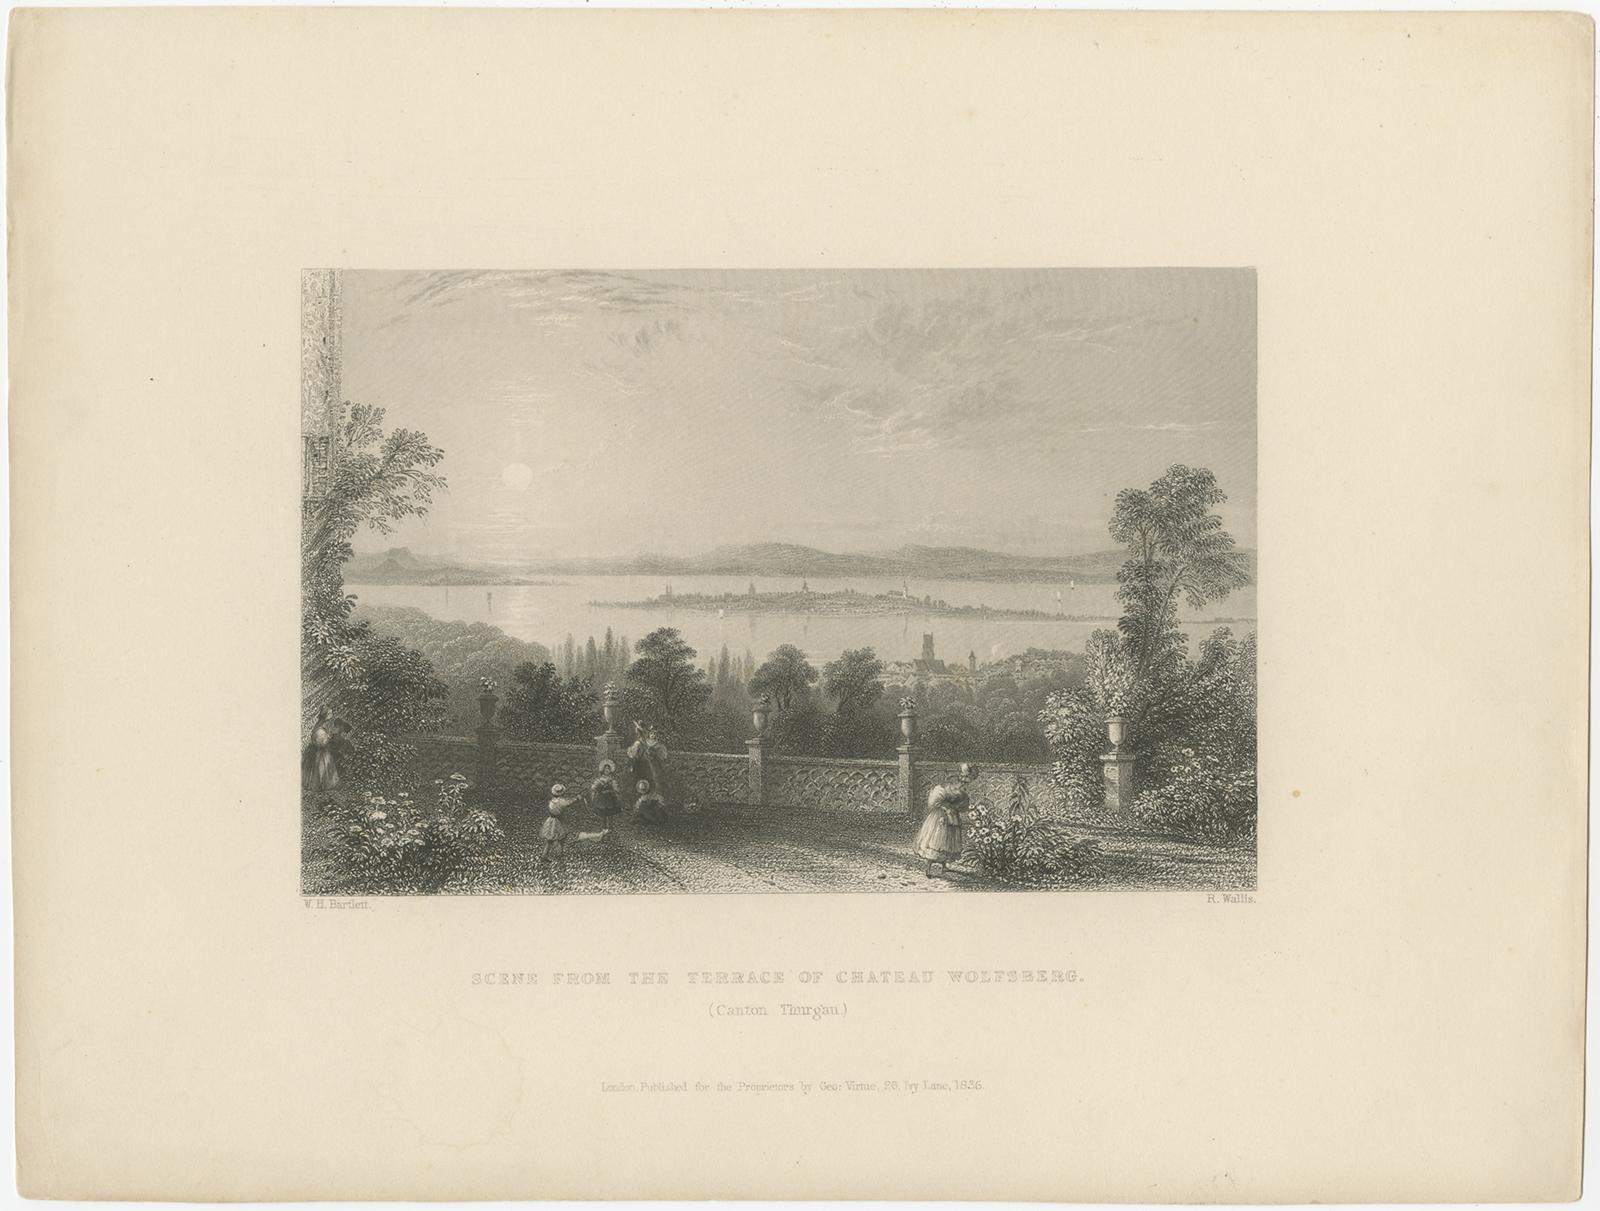 The antique print titled 